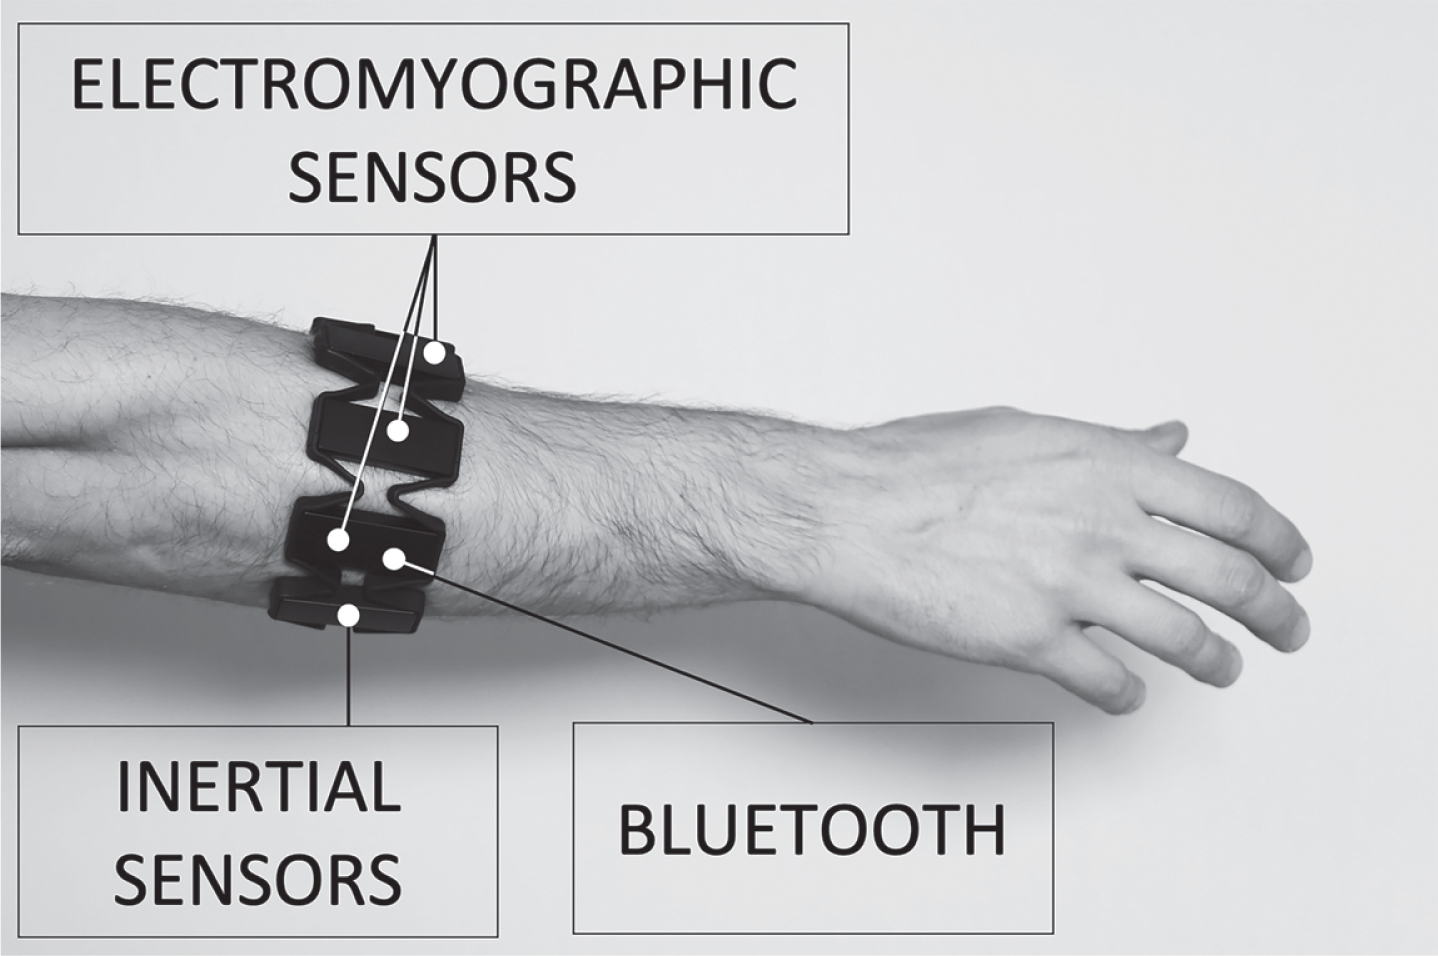 The Myo armand [29], which integrates electromyographic and inertial sensors for the recognition of five gestures, and a Bluetooth module for wireless connection to other devices.